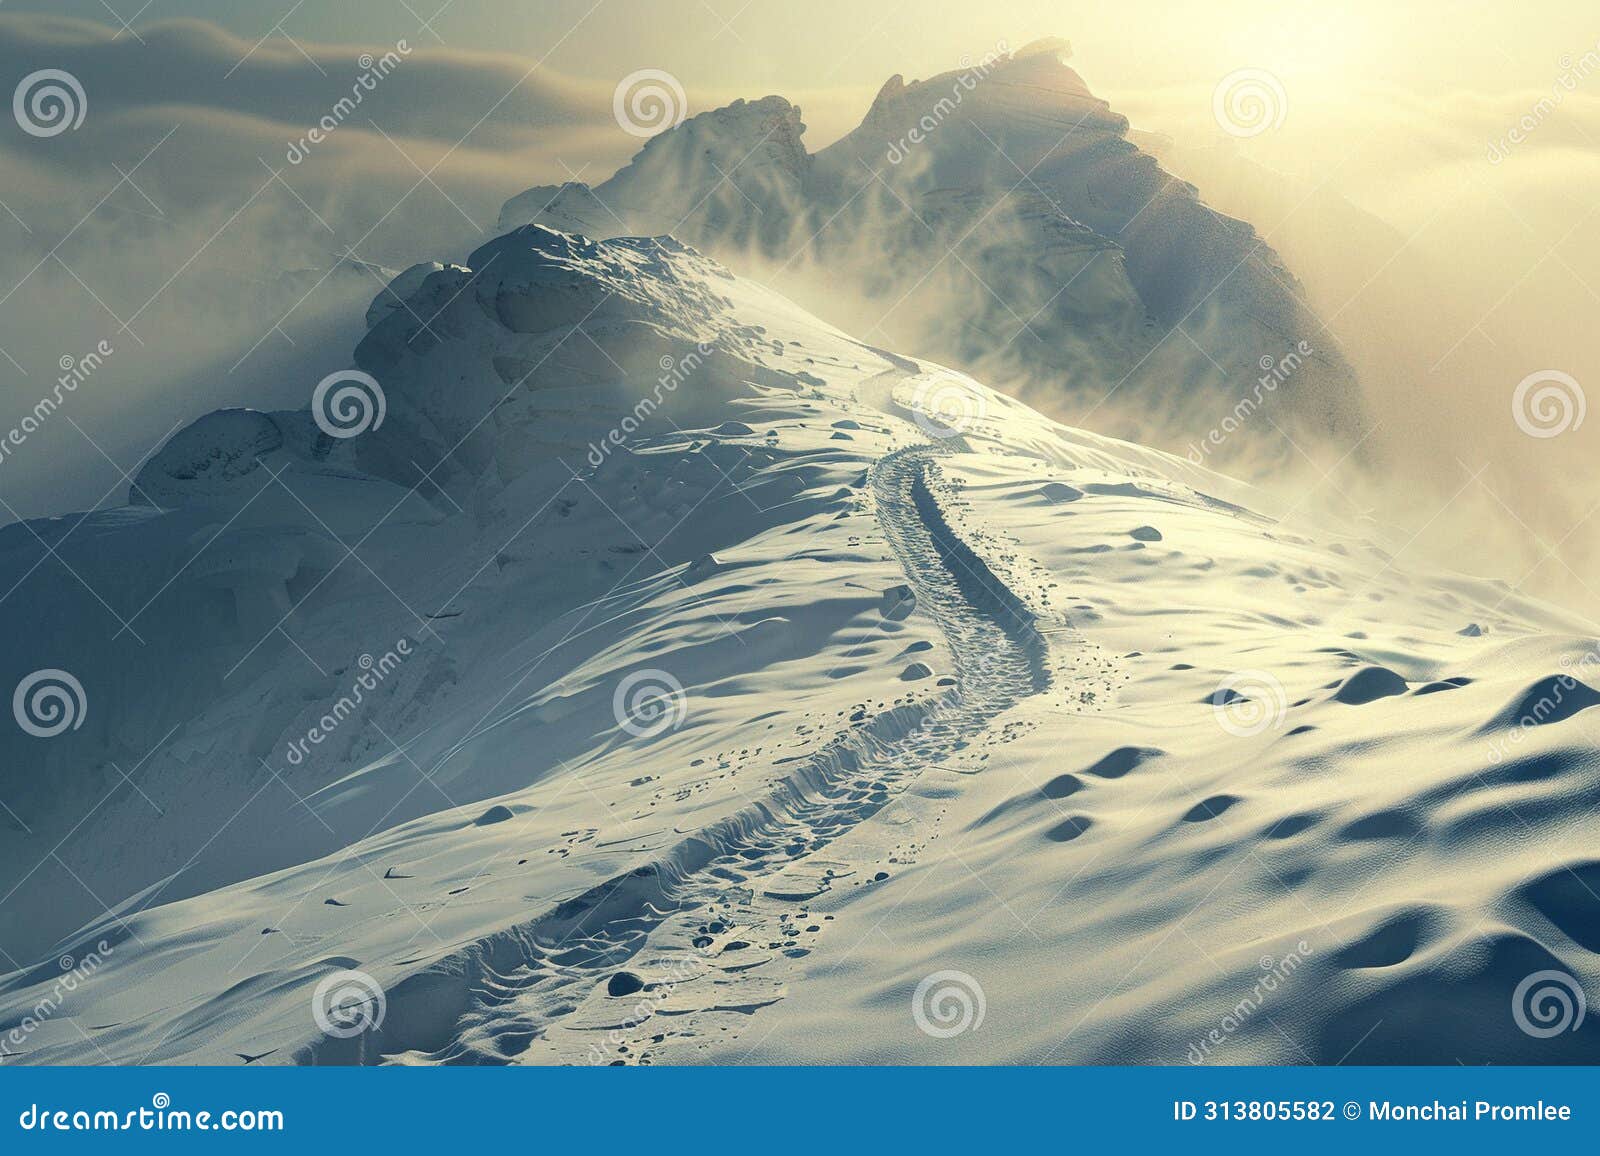 snowy mountain defile, narrow trail, early morning light, side angle, untouched snow, pristine